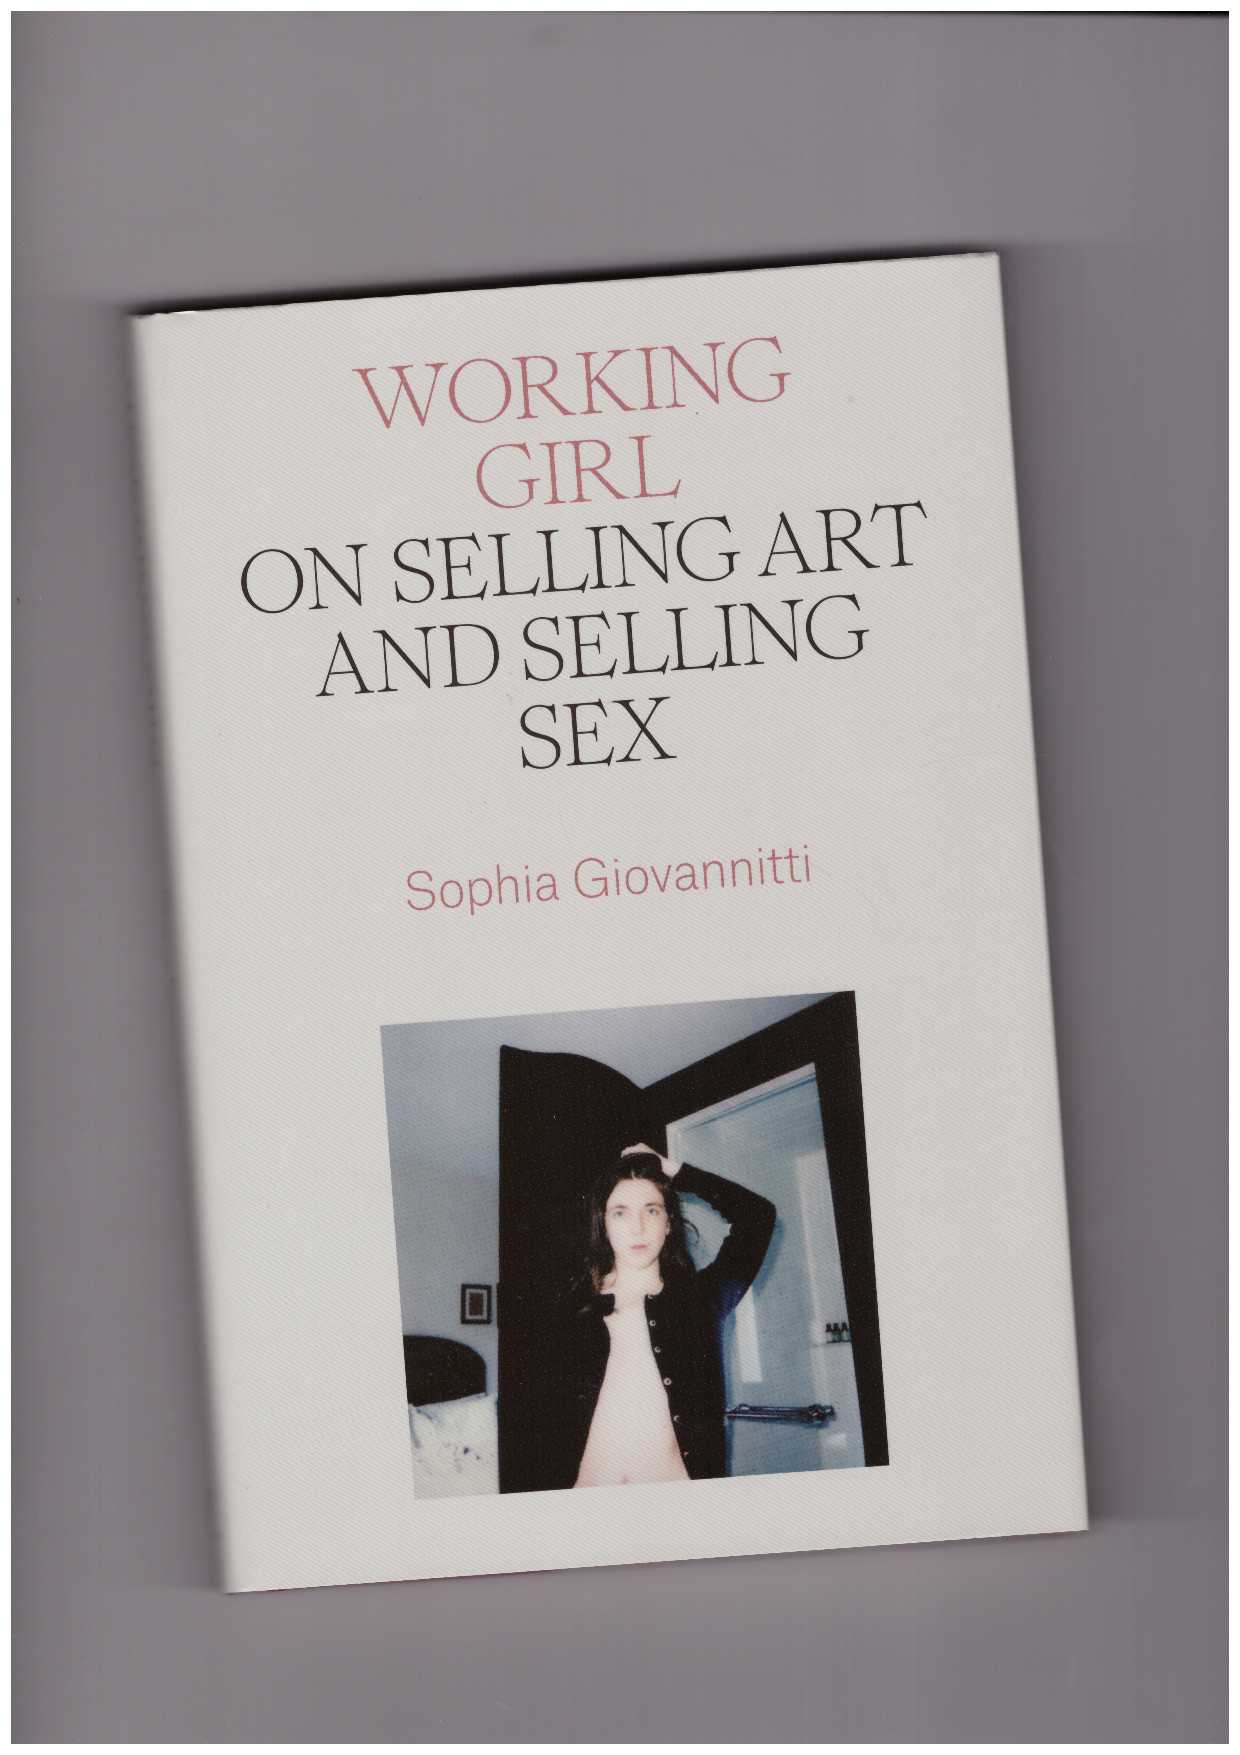 GIOVANNITTI, Sophia - Working Girl. On Selling Art and Selling Sex